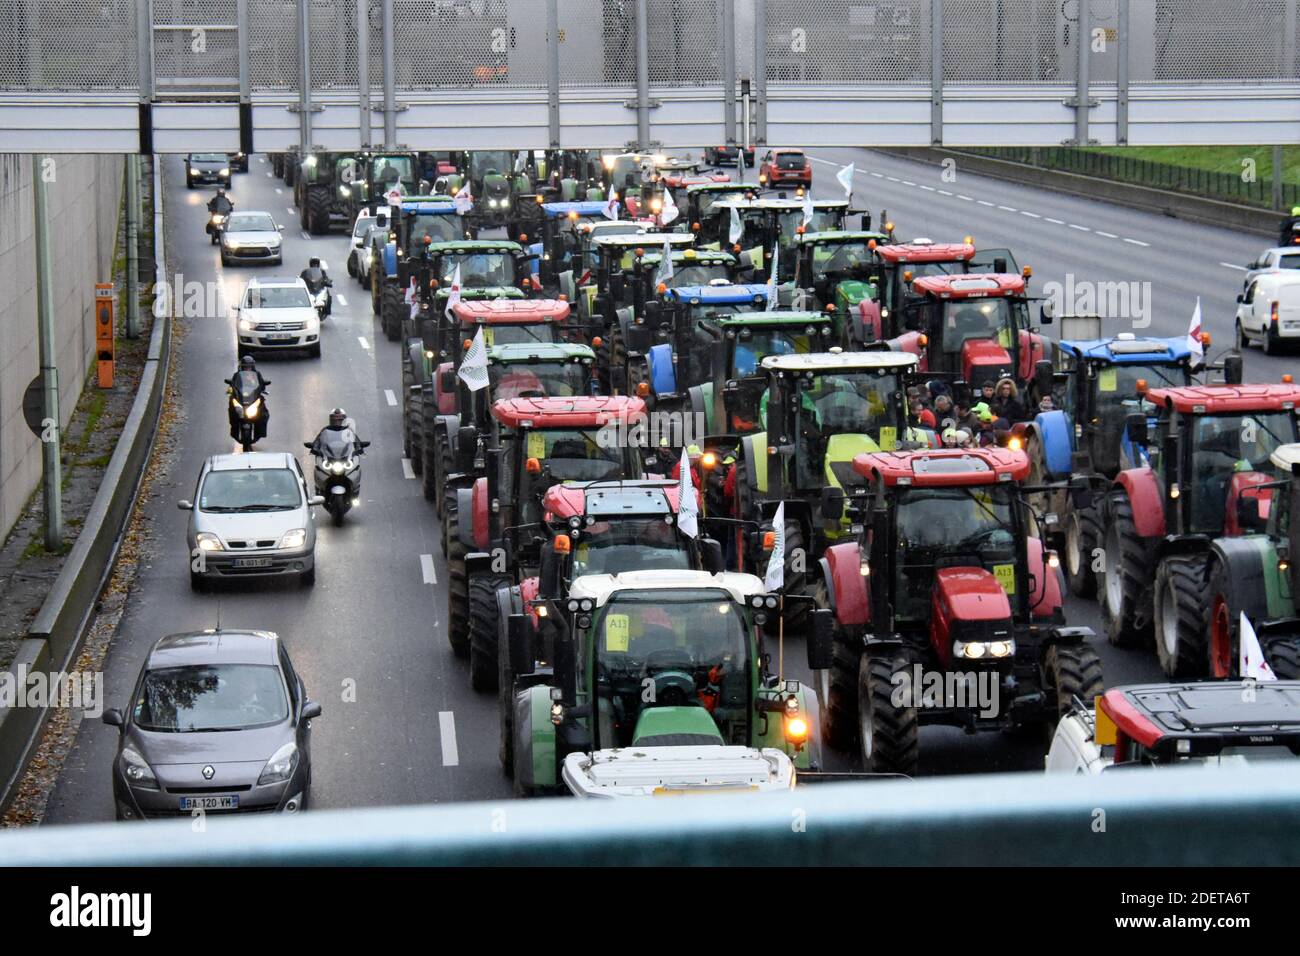 French farmers steer their tractors on The Parisian ring road (Peripherique)  at Porte de Champerret in Paris on November 27, 2019, during a protest  against government policies. Hundreds of French farmers descended